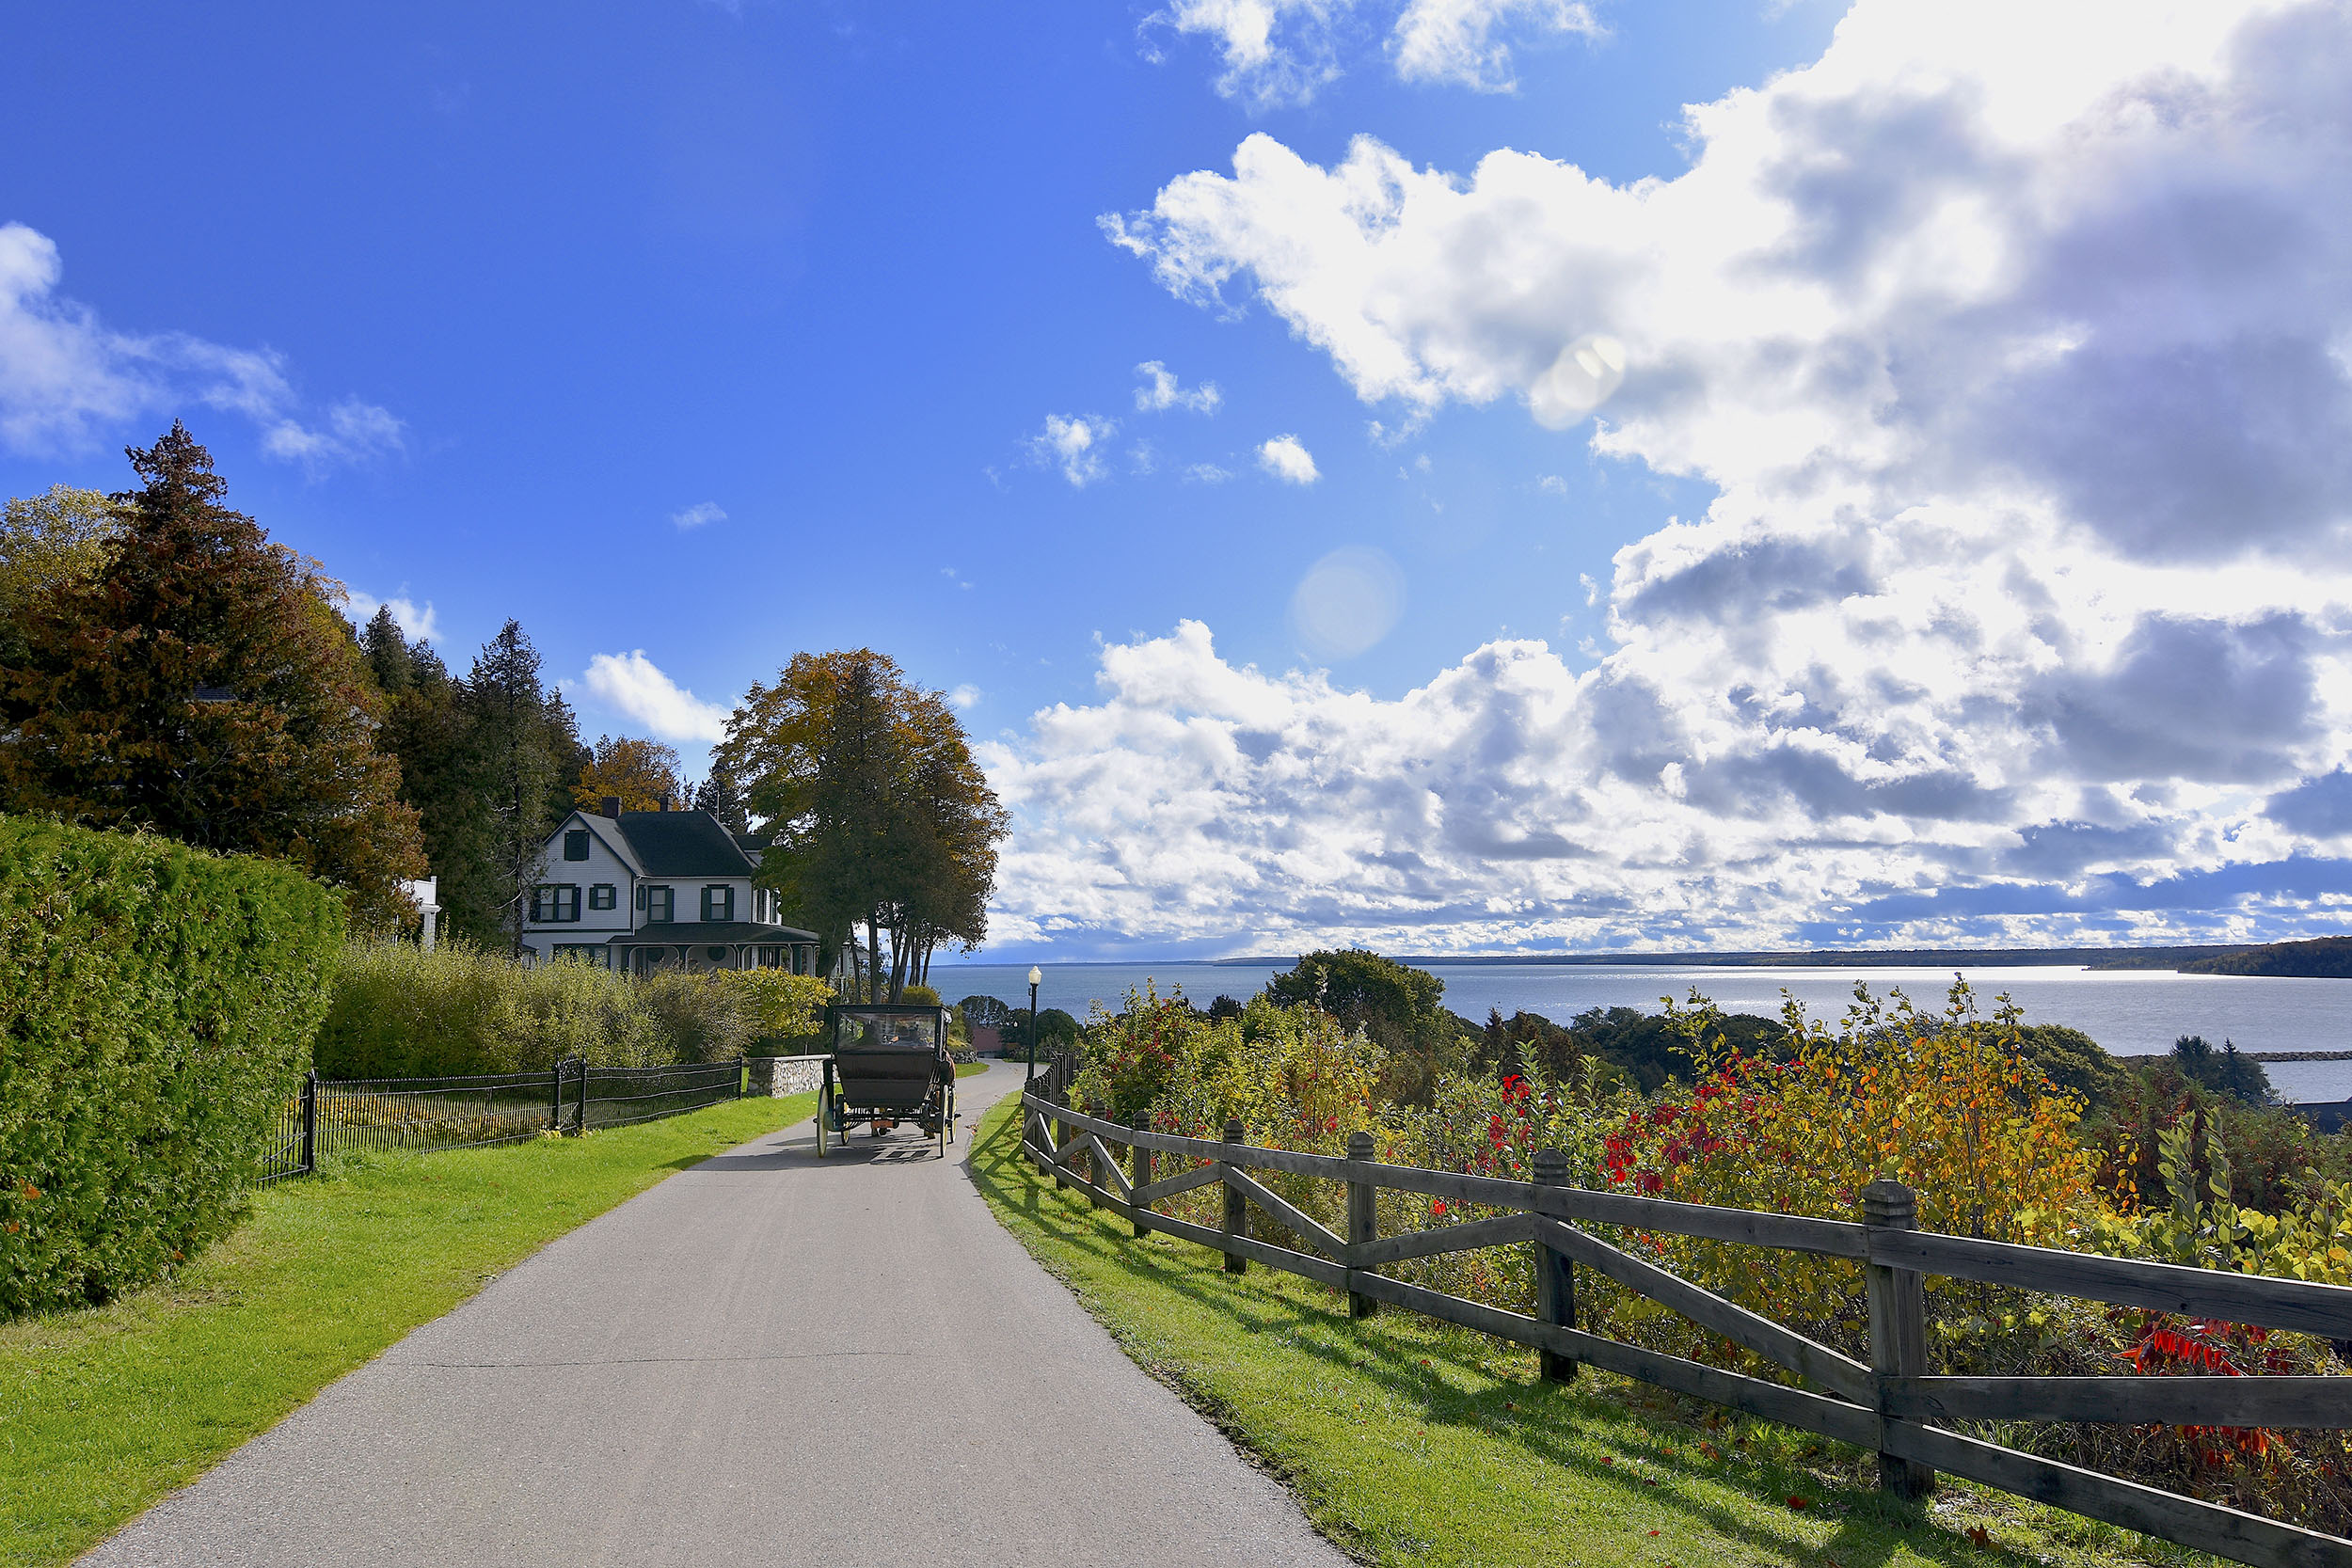 Streets of Mackinac Island in the Fall